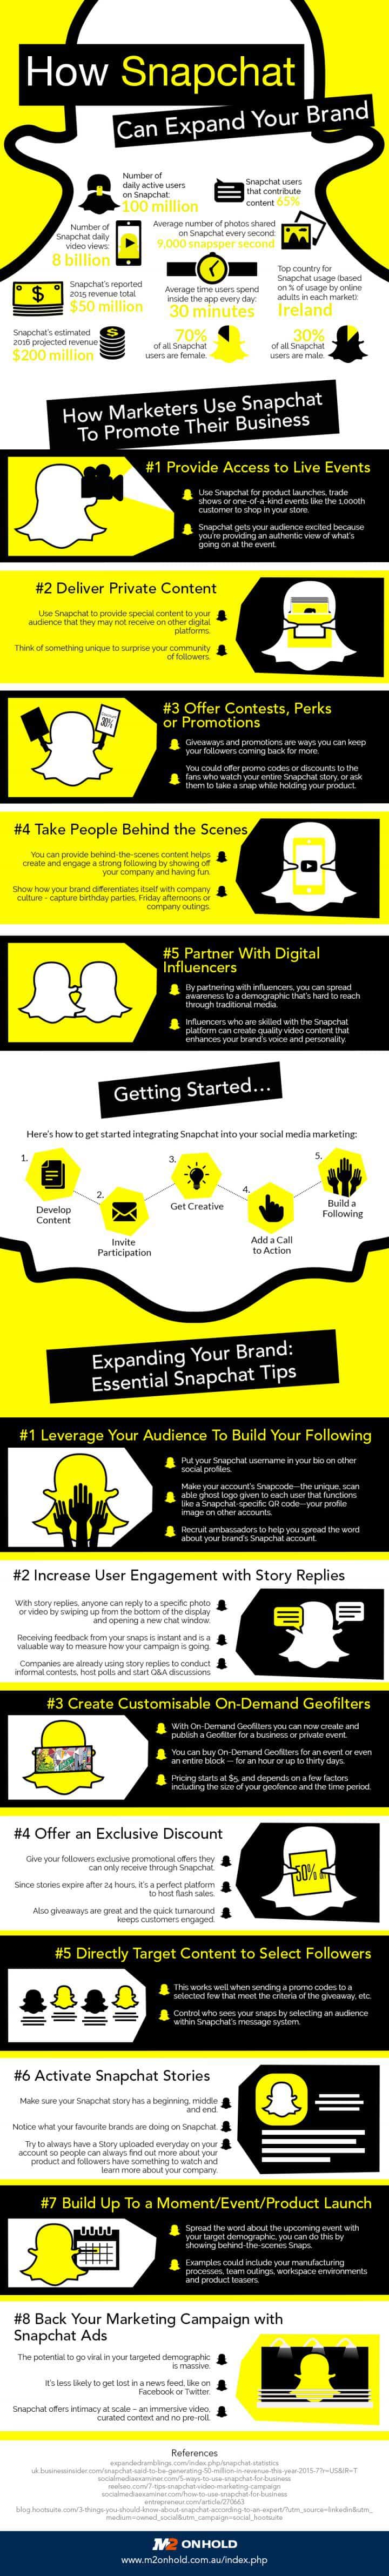 infographie snapchat